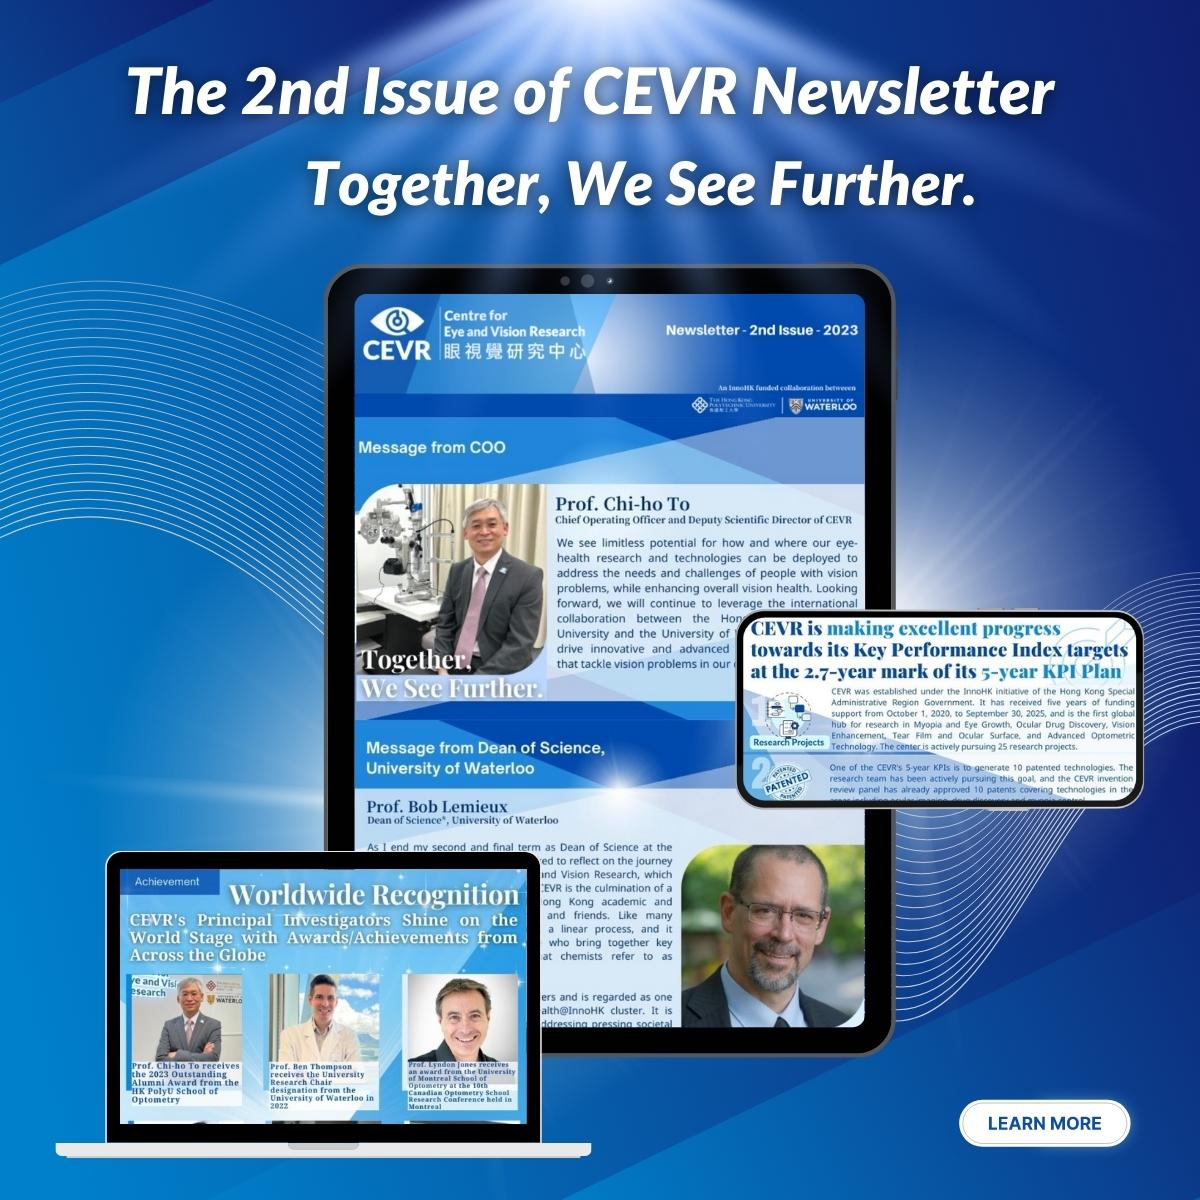 Stay up-to-date with the latest Eye and Vision research!  Check out the 2nd issue of #CEVR Newsletter now! lnkd.in/g6QADe-b

#CEVR #PolyU #UW #EyeResearch #VisionScience #StayInformed #ResearchUpdates